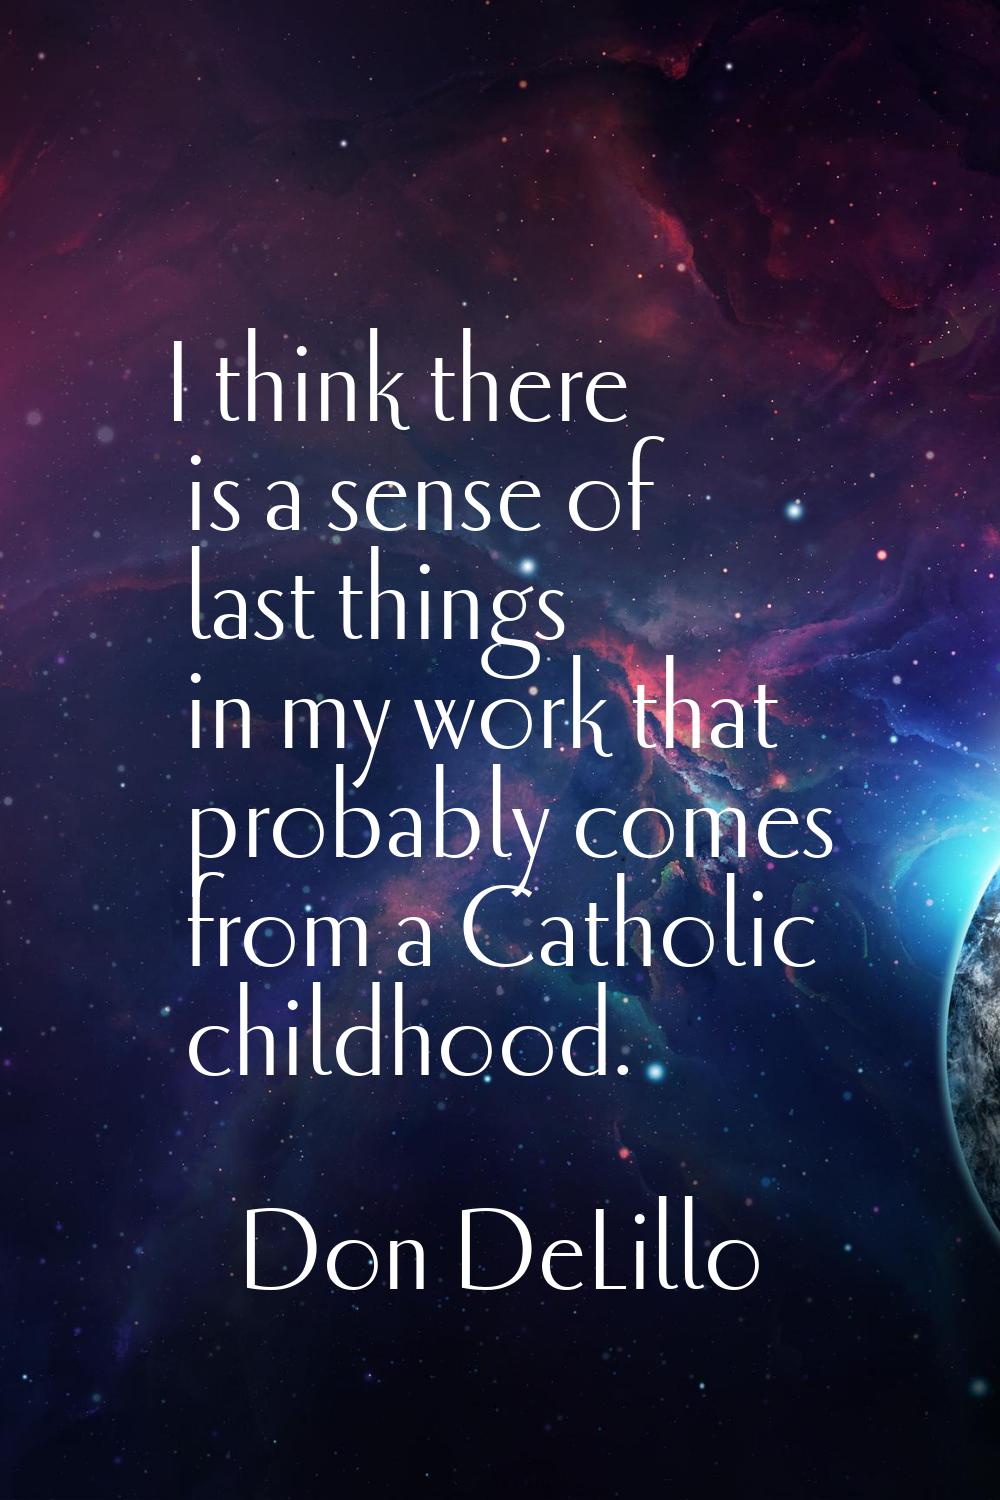 I think there is a sense of last things in my work that probably comes from a Catholic childhood.